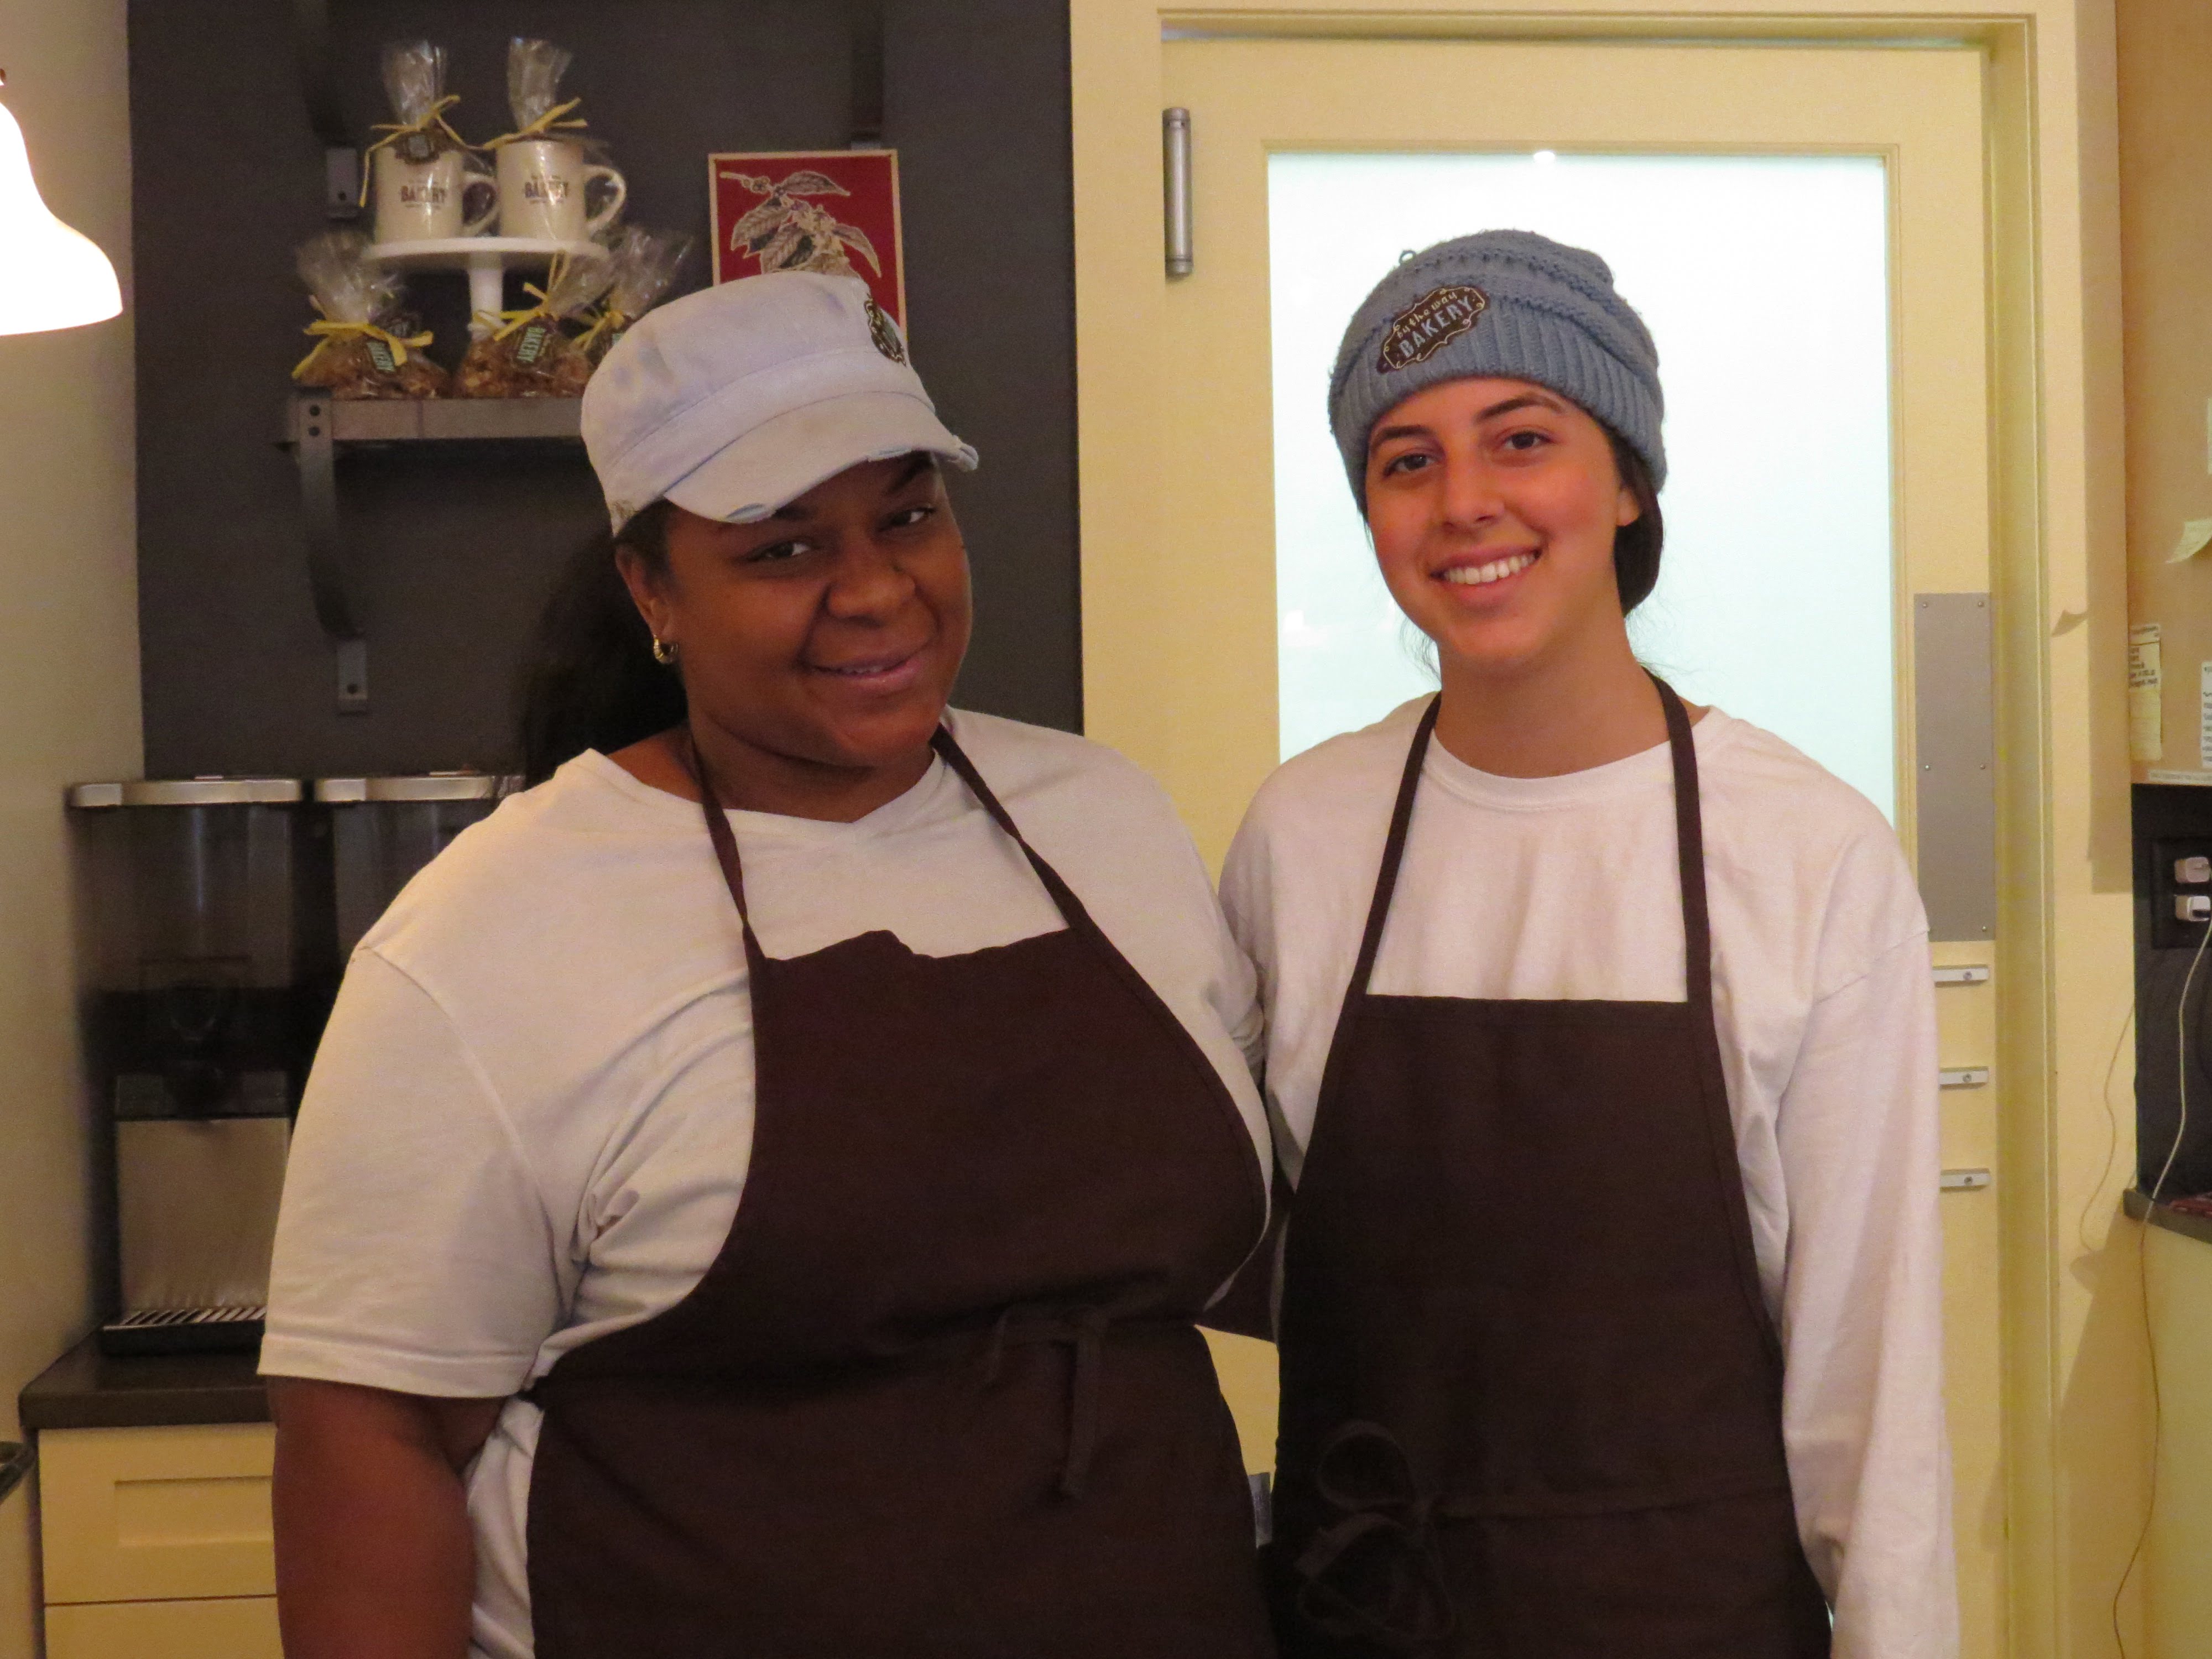 Employees at By The Way Bakery's Greenwich location, Suleay Roman (left) and Christina Midollo (right). June 6, 2017. Photo: Devon Bedoya.